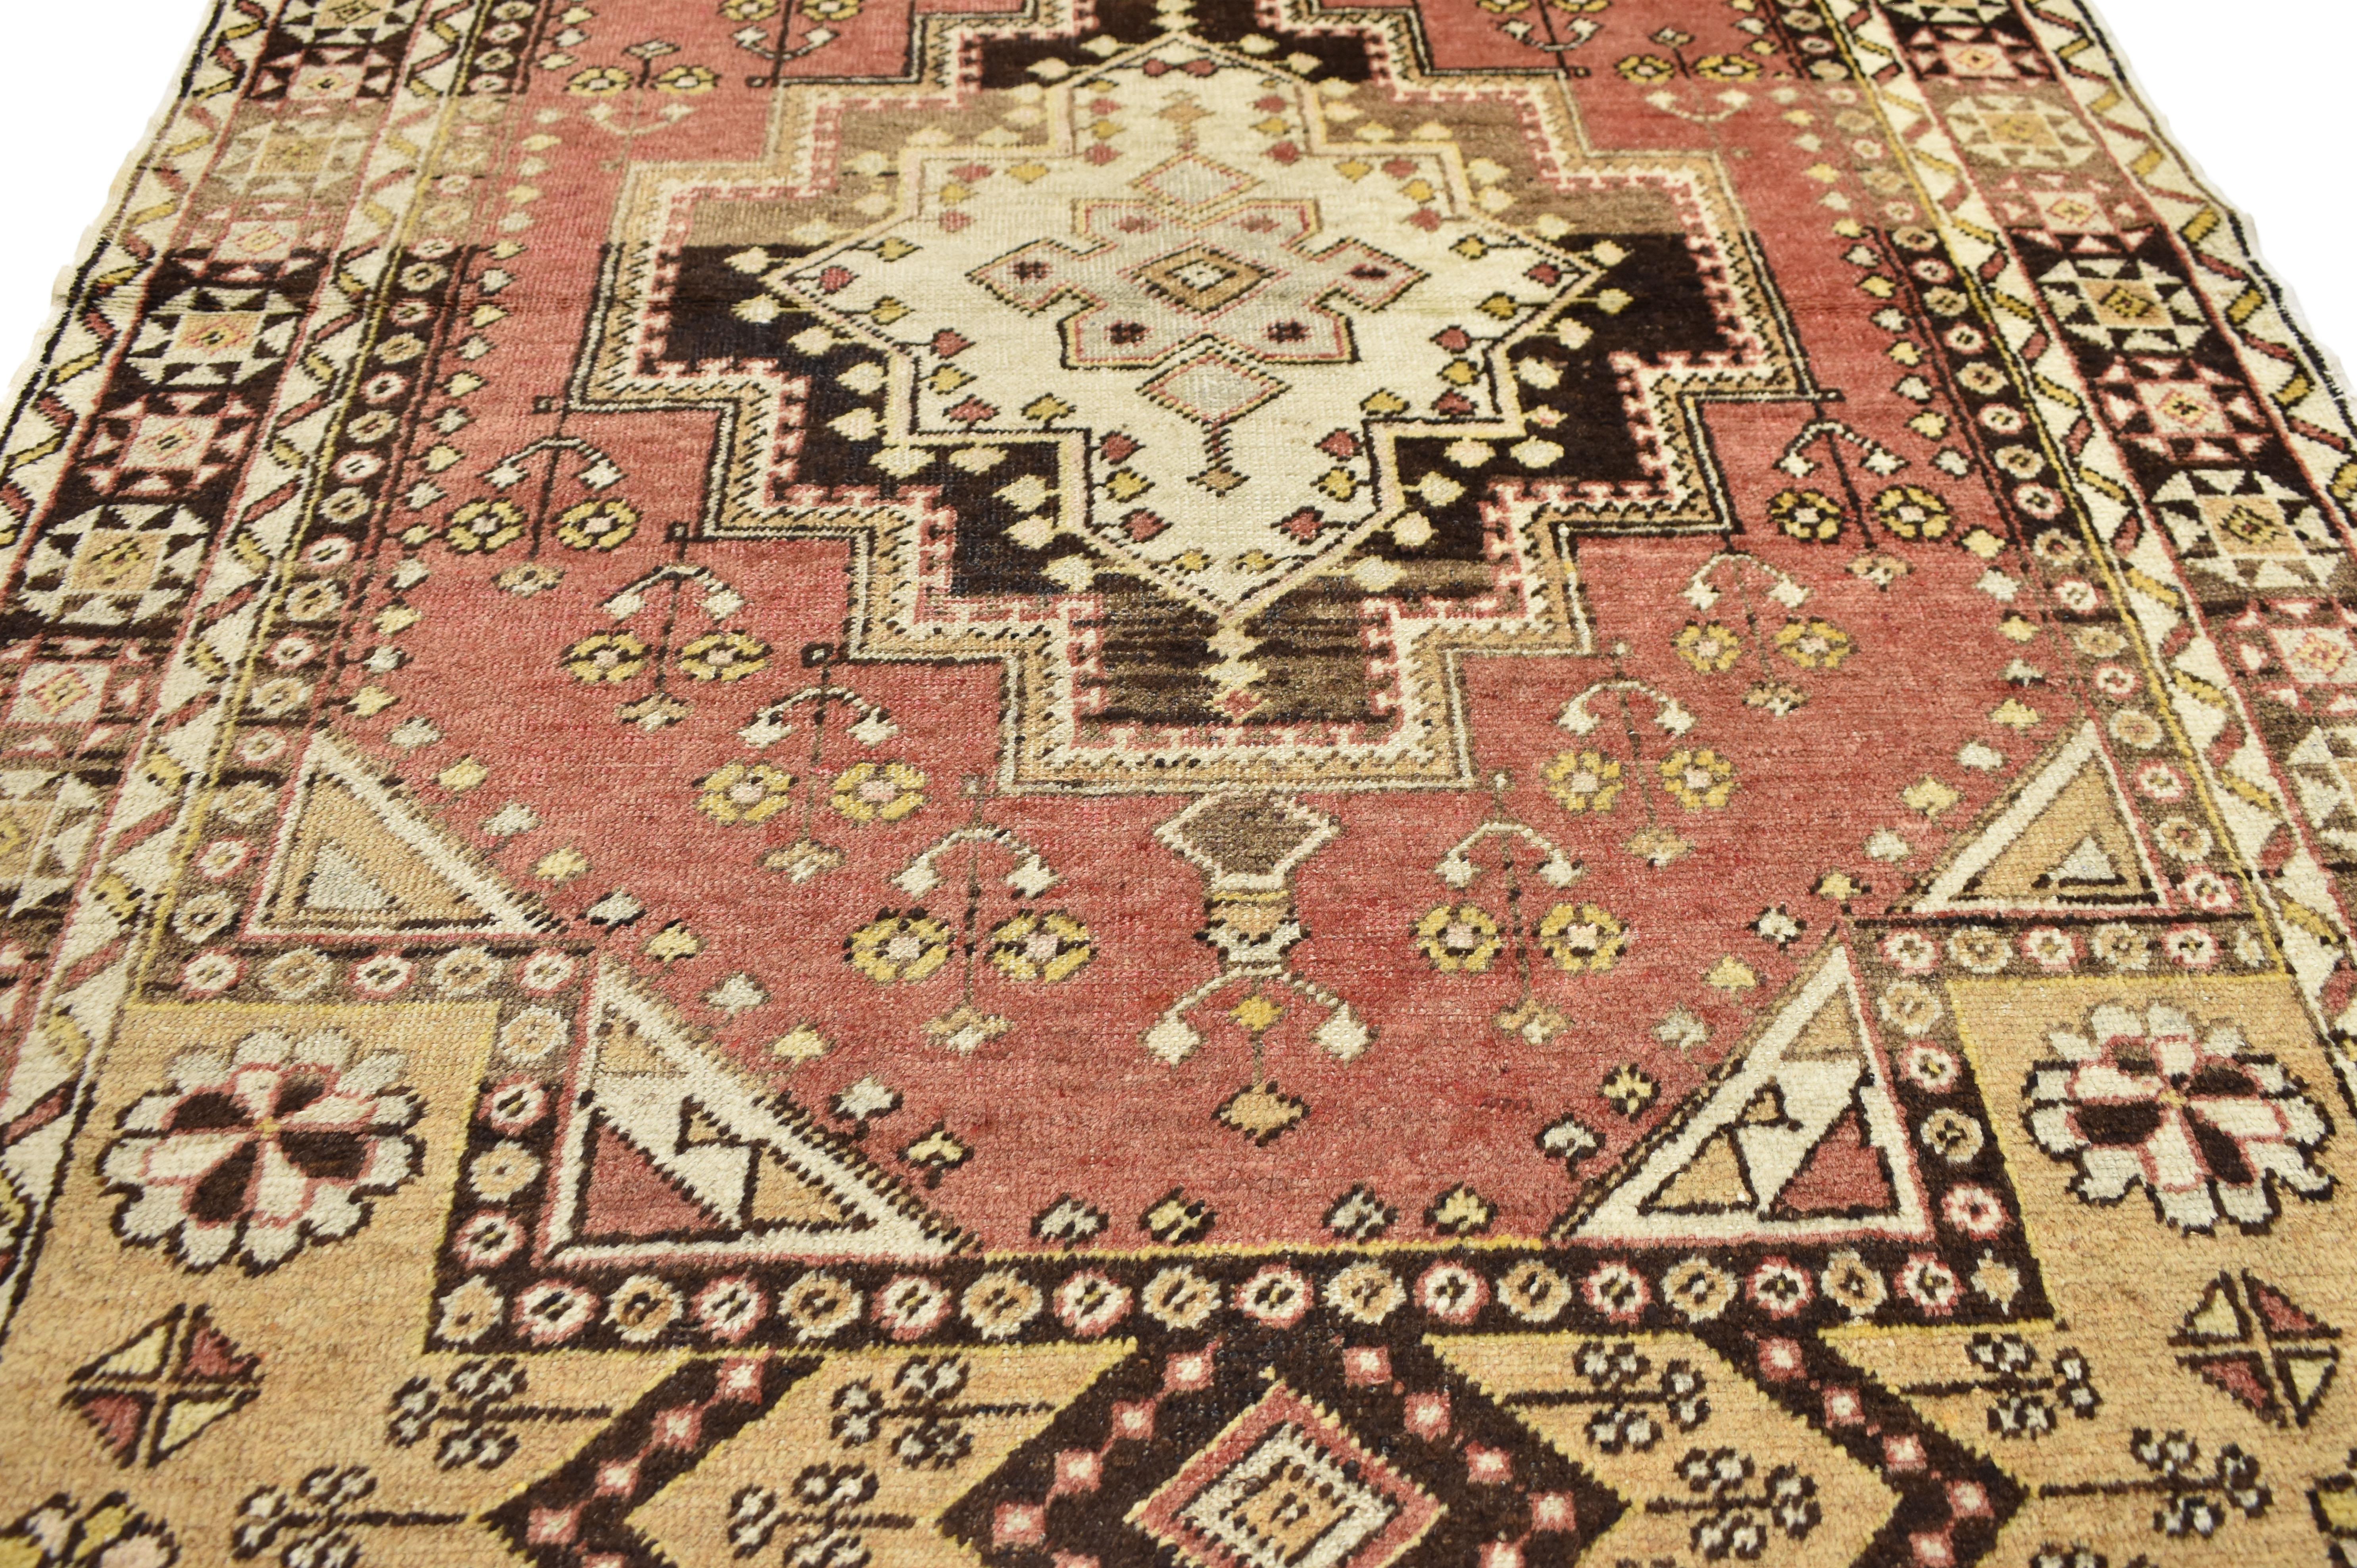 73922, vintage Turkish Oushak accent rug, entry or foyer rug. This hand knotted wool vintage Turkish Oushak rug features an almond colored eight-point star placed inside an espresso-coffee colored stepped medallion floating in a rustic brick red